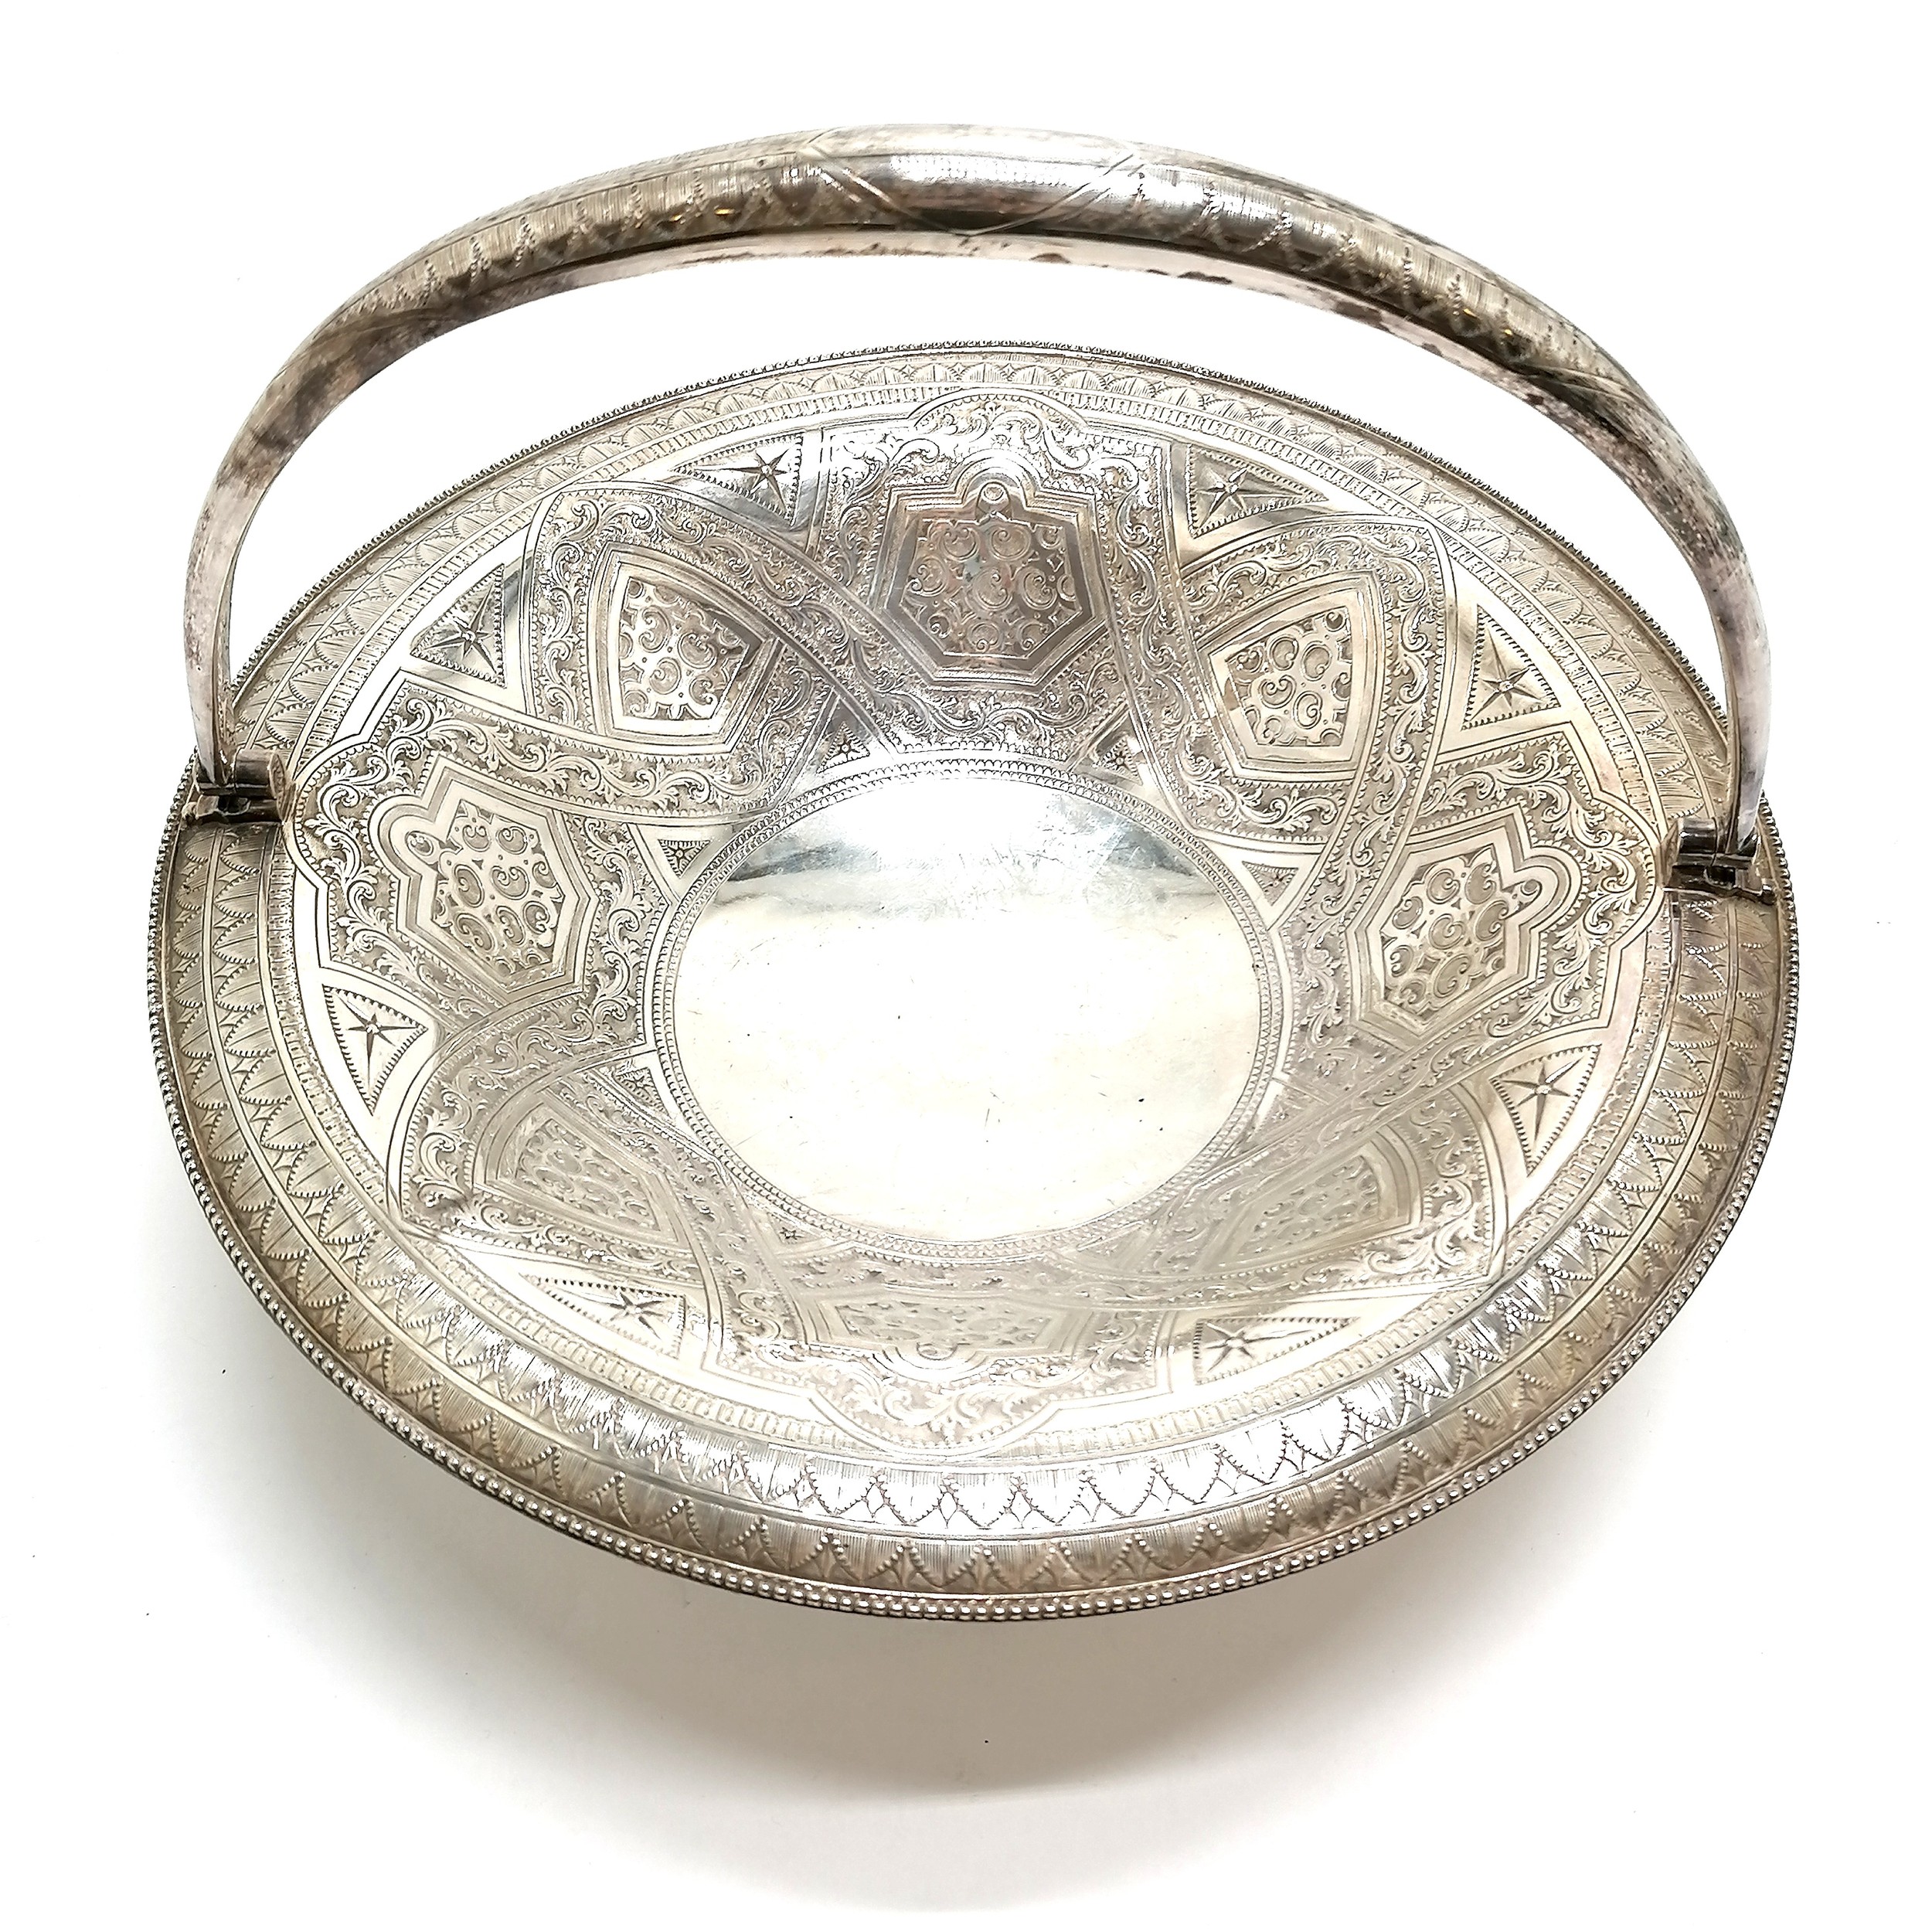 1870 Scottish silver basket with hand worked profuse decoration by William Marshall - 27cm - Image 3 of 3